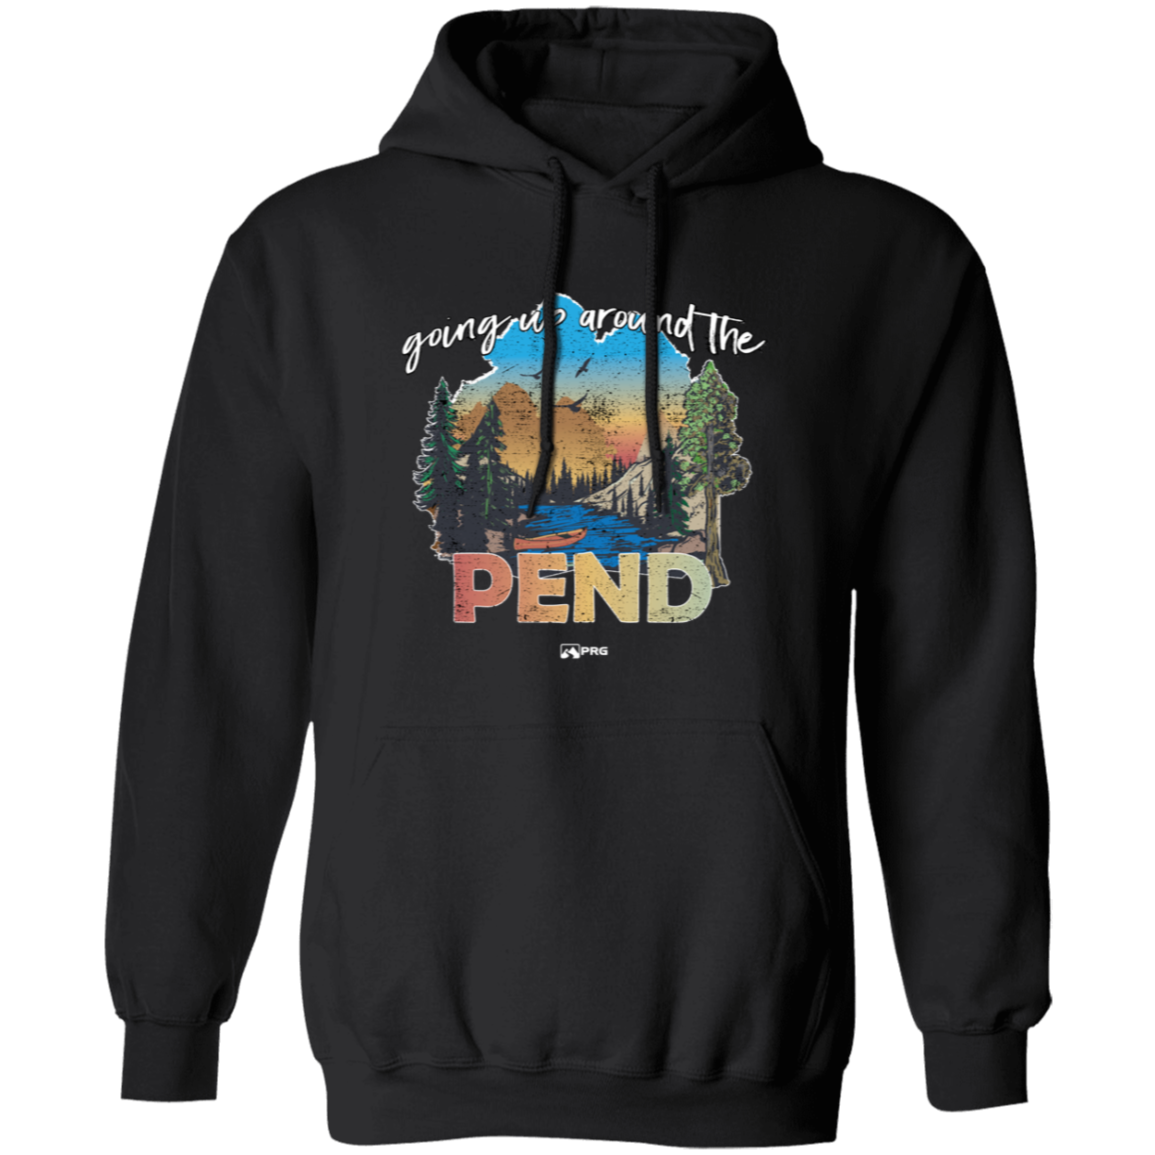 Around the Pend - Hoodie